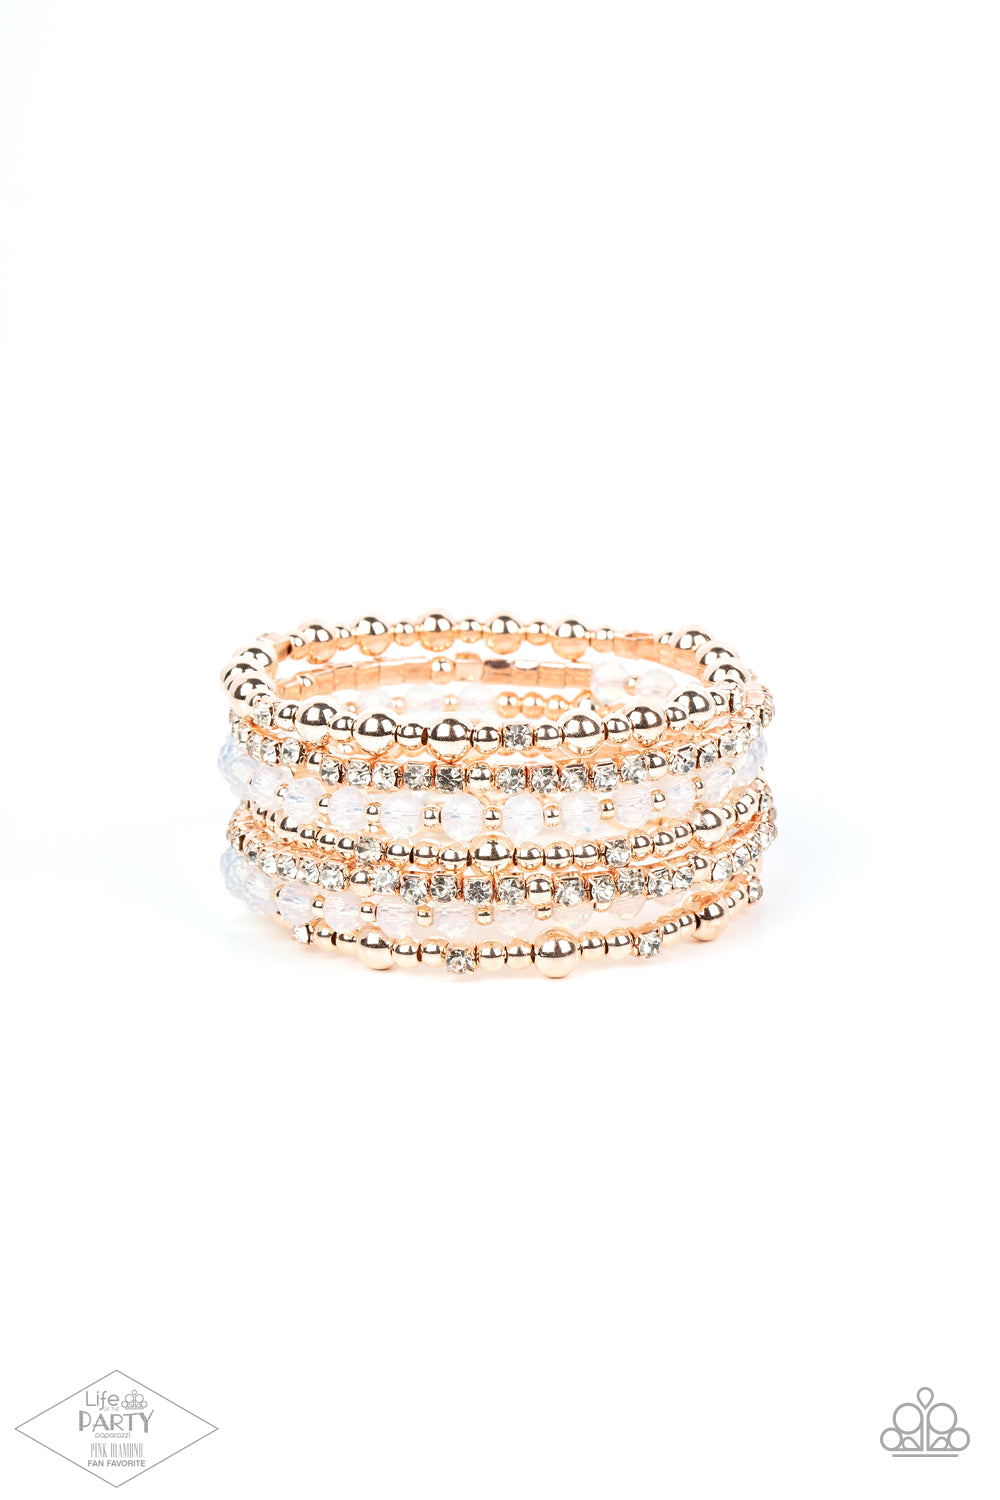 ICE Knowing You - Rose Gold Coil Fashion Bracelet - Paparazzi Accessories - An icy collection of rose gold beads, rose gold cubes, opaque crystals, and glassy white rhinestones are threaded along a coiled wire, creating a blinding infinity wrap style bracelet around the wrist.